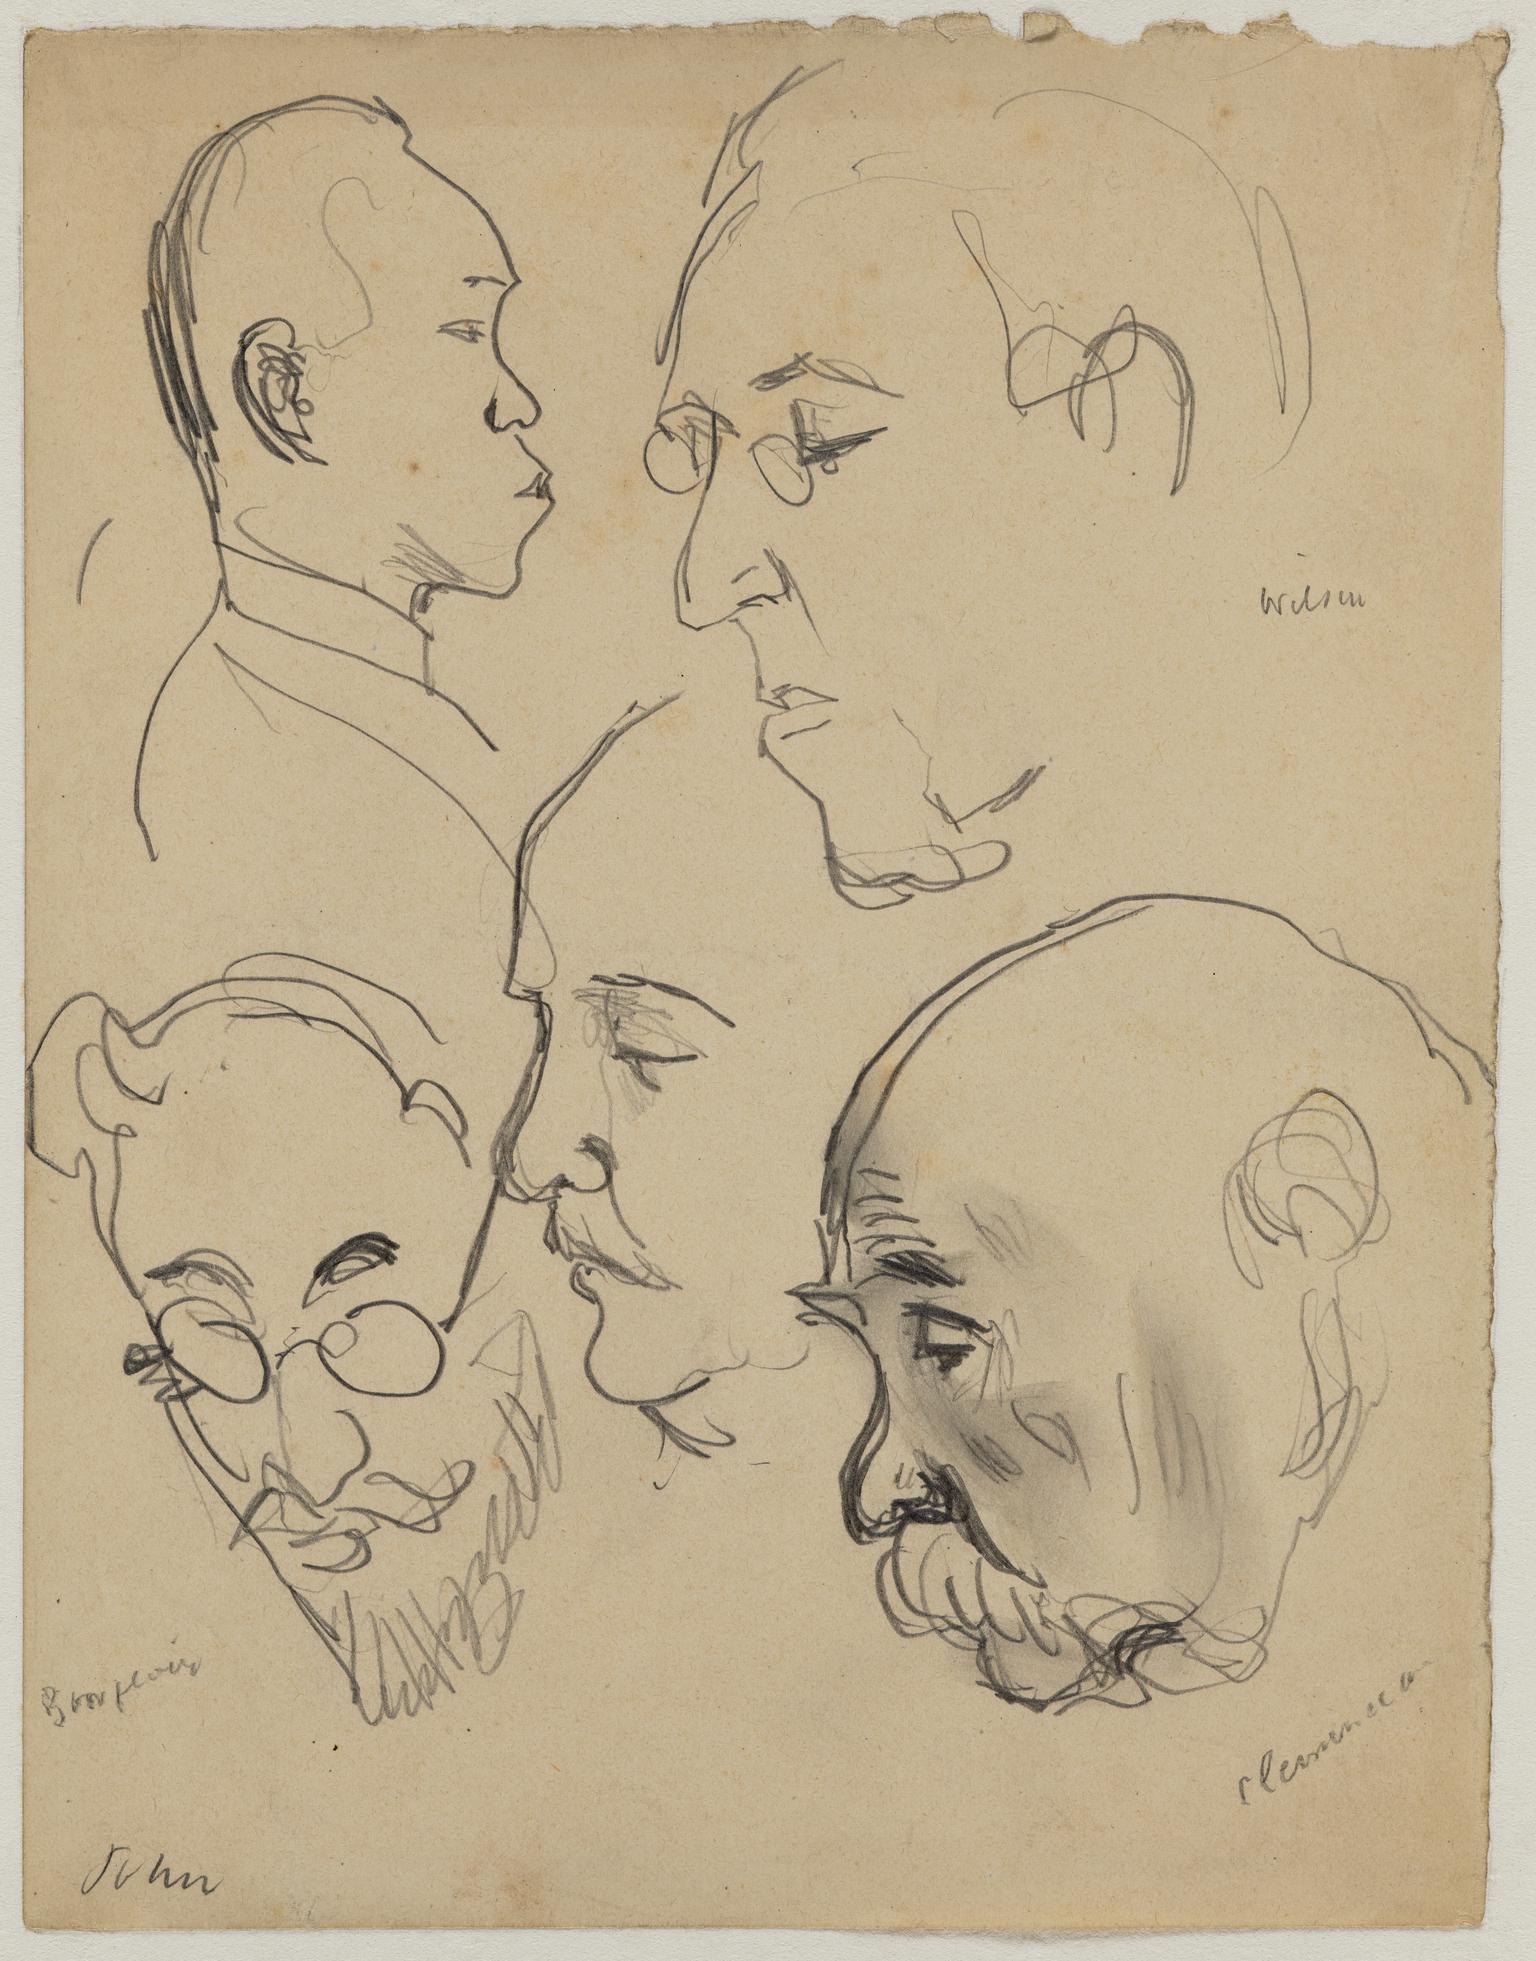 T Woodrow Wilson (1856-1924), Leon-Victor Auguste Bourgeois (1851-1925) and George Clemenceau (1841-1929), caricature of an unidentified Japanese and a study of the head of an unidentified man